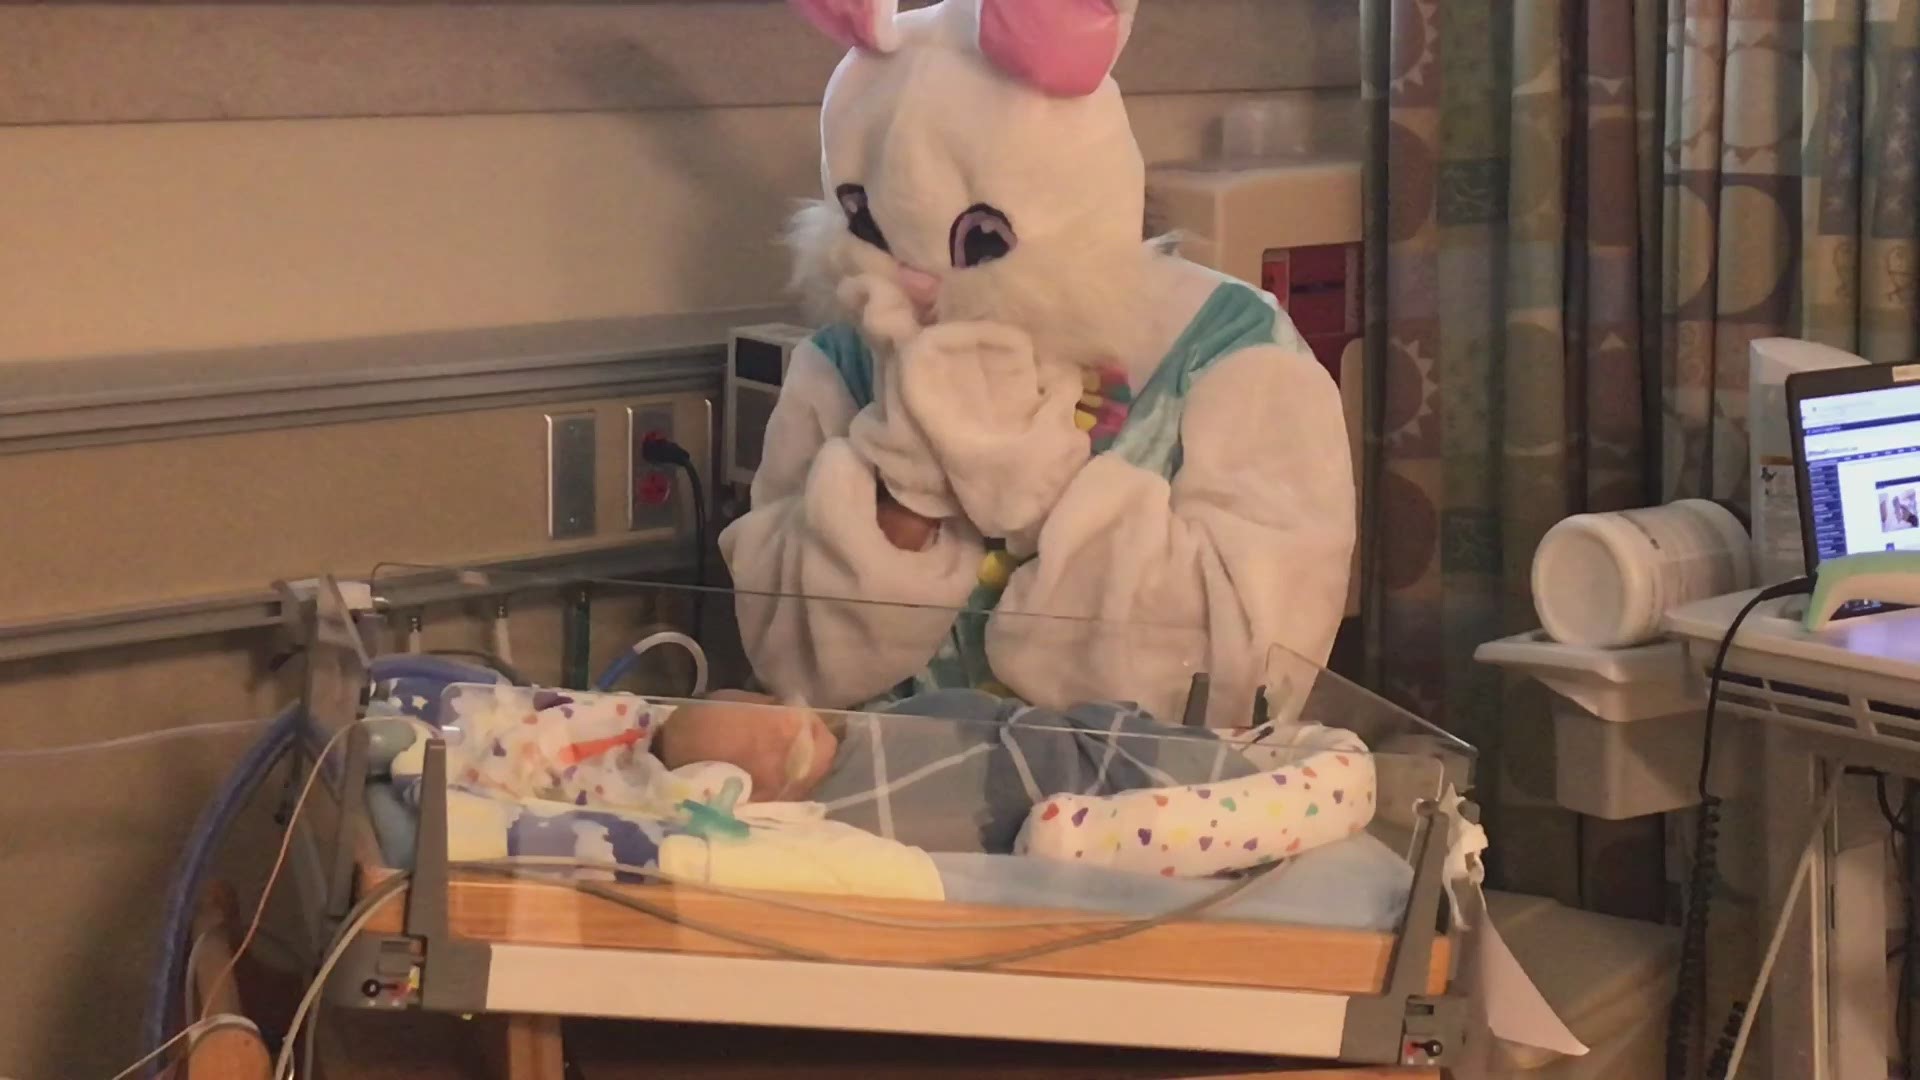 The Easter Bunny visited infants in the NICU at St. David's Women's Center of Texas.